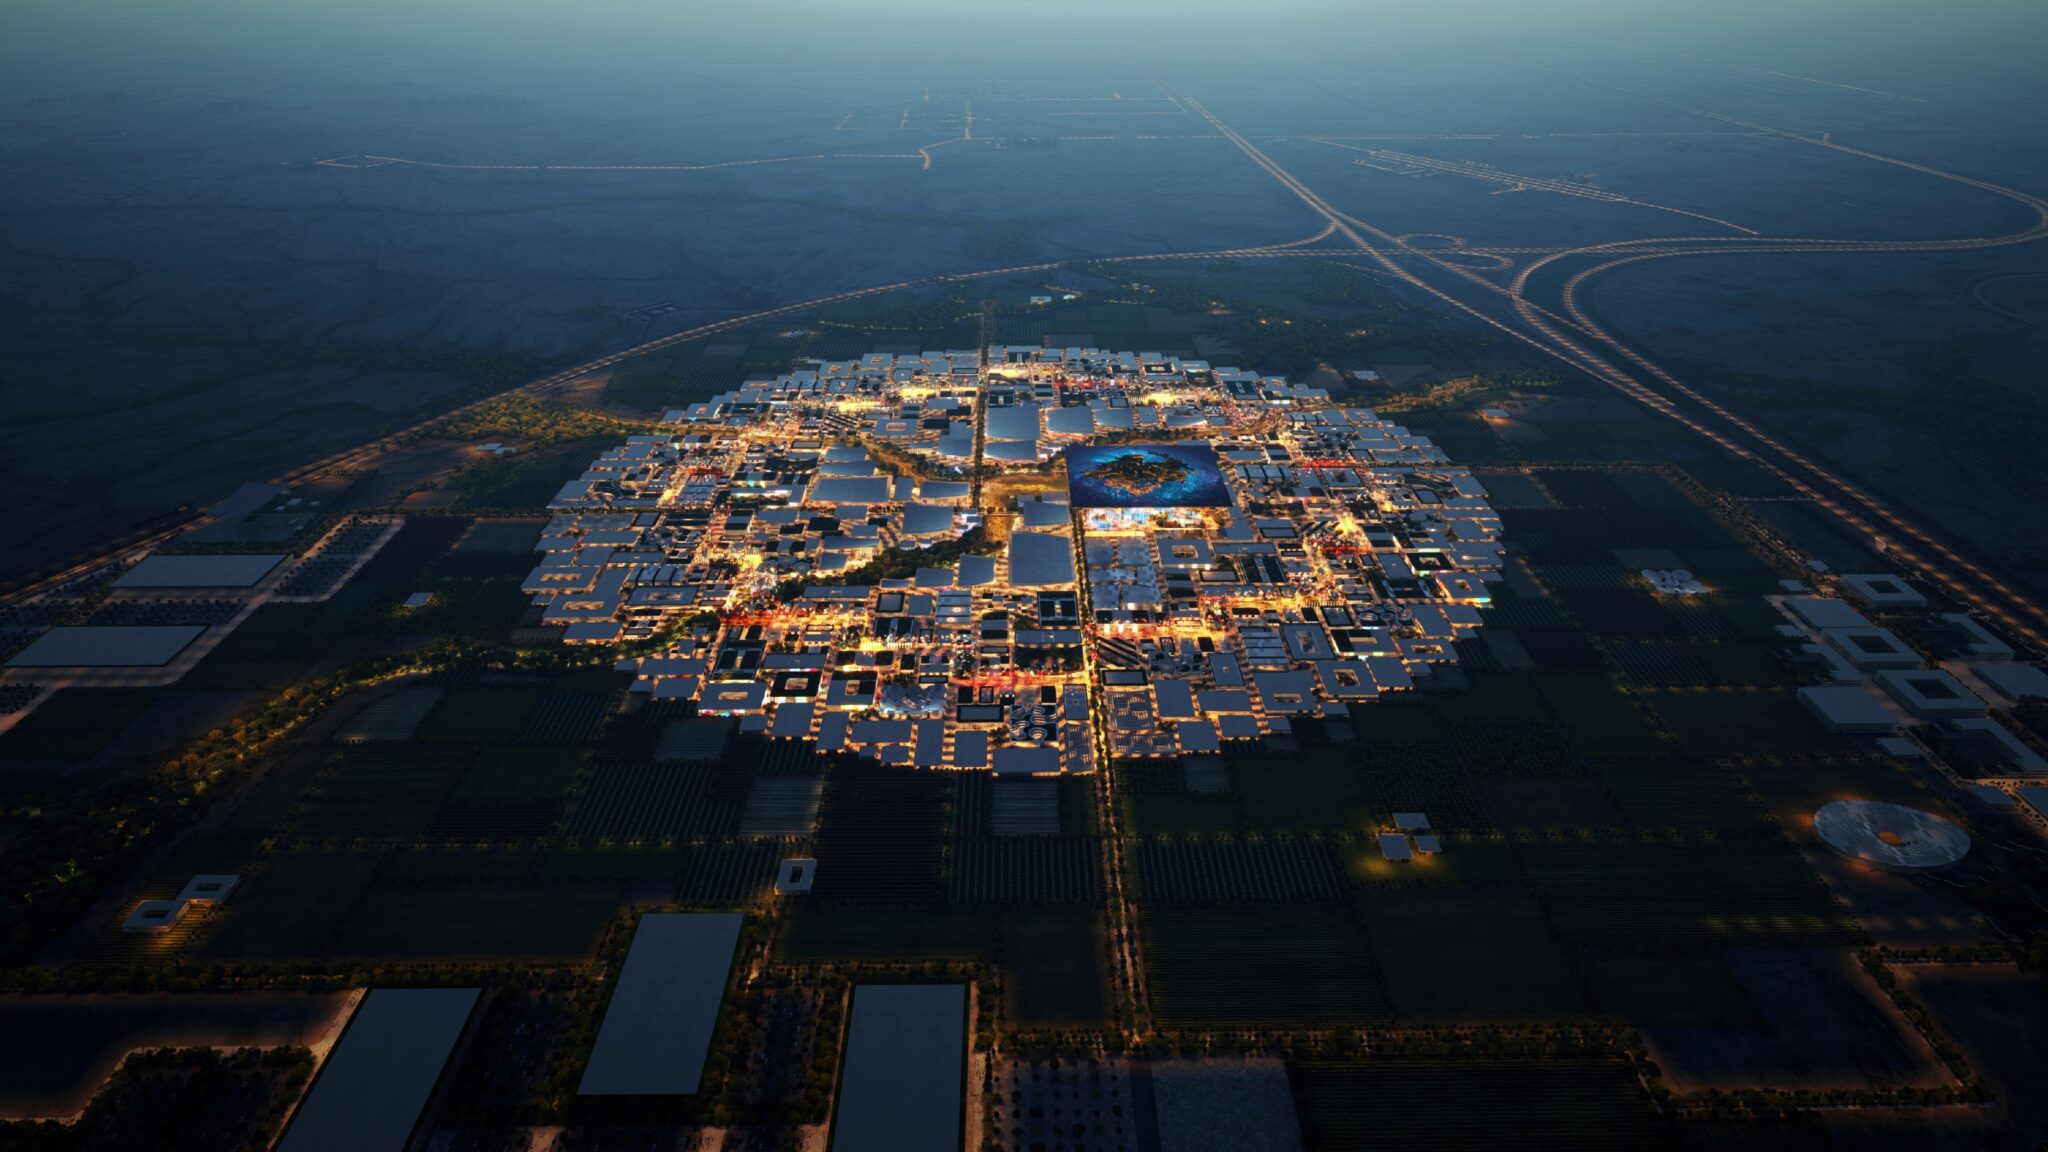 A render of the Riyadh World Expo 2030 site.